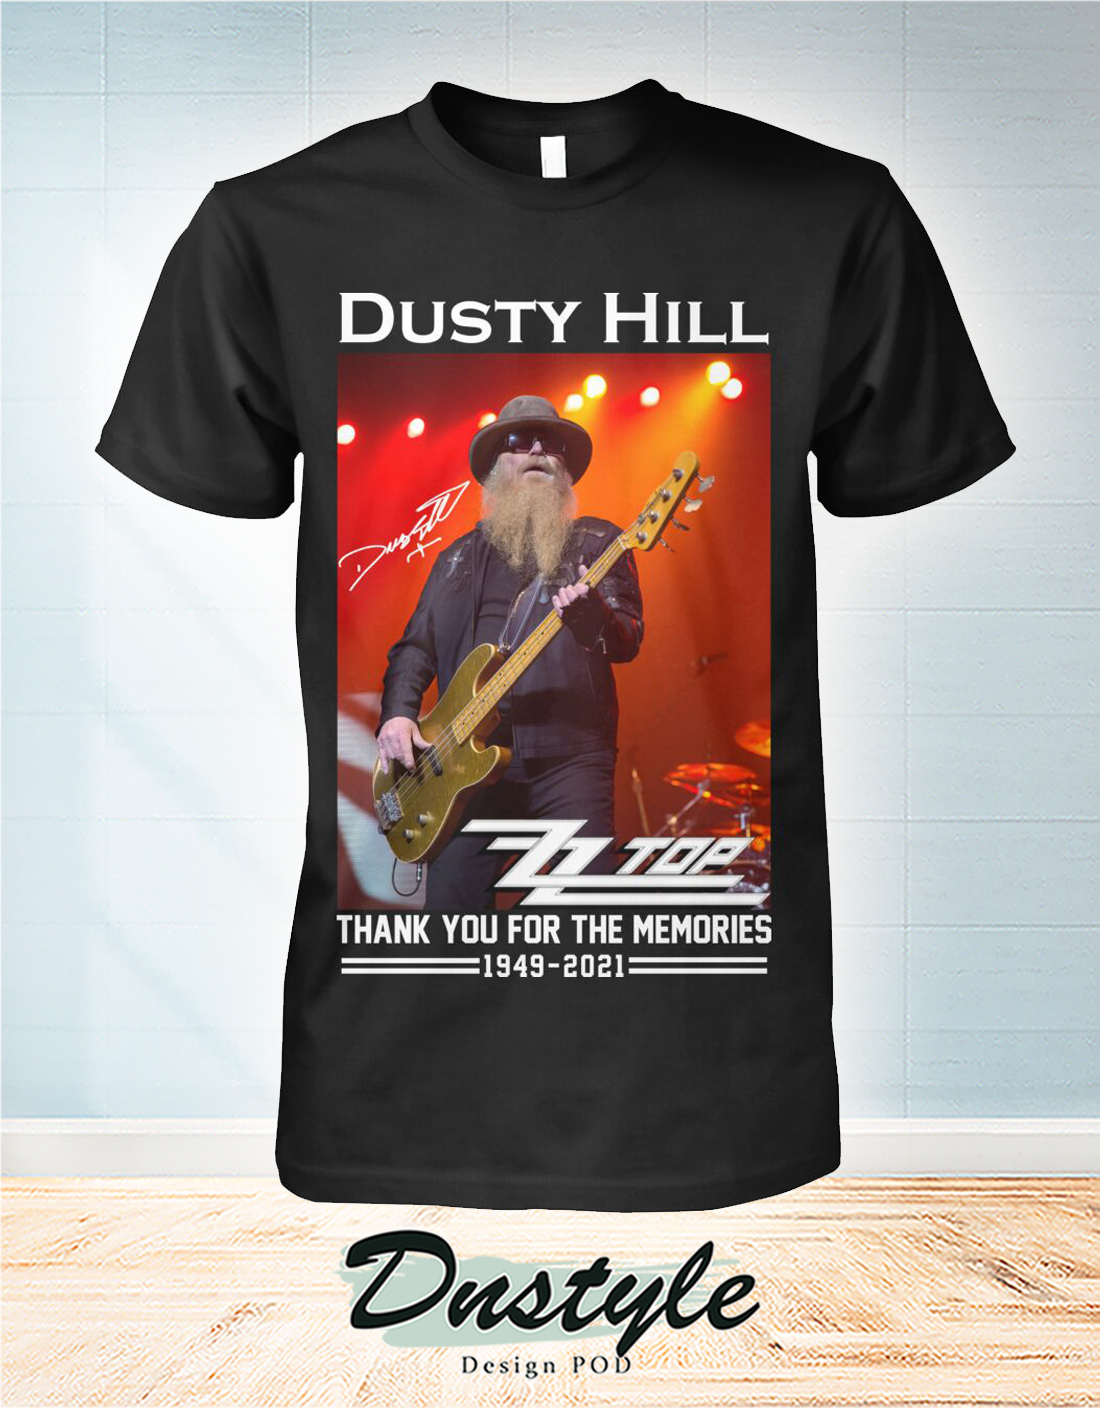 Zz Top Dusty Hill thanks for the memories shirt